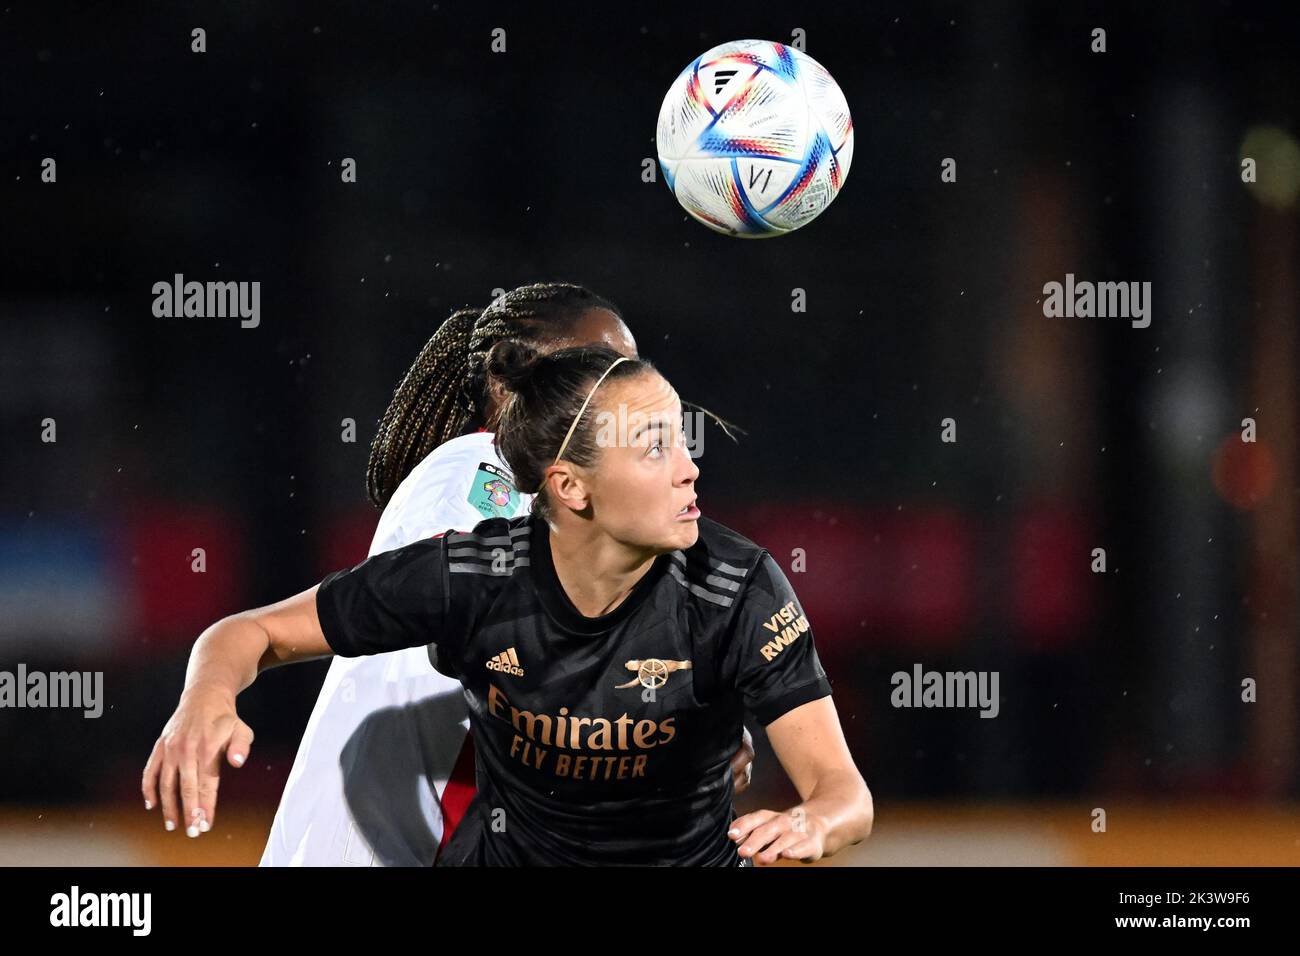 AMSTERDAM - (lr) Liza van der Most of Ajax women, Caitlin Foord of Arsenal WFC during the UEFA Champions League women's match between Ajax Amsterdam and Arsenal FC at De Toekomst sports complex on September 28, 2022 in Amsterdam, Netherlands. ANP GERRIT VAN COLOGNE Stock Photo